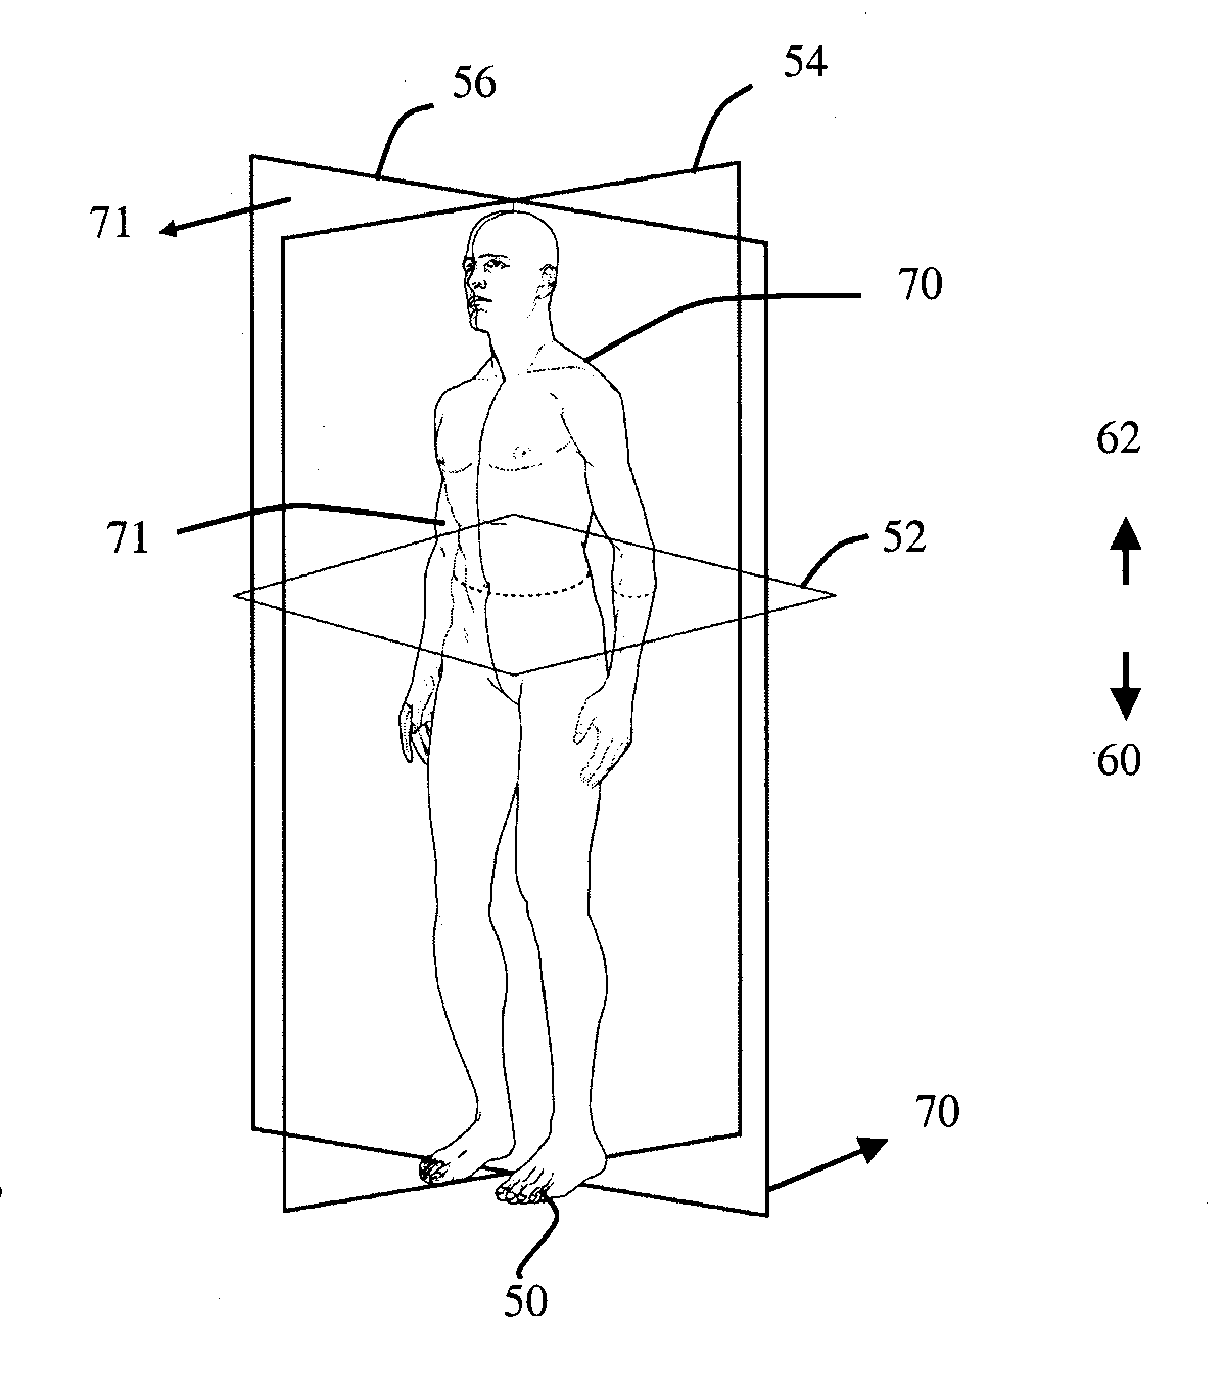 Devices, Systems and Methods for Measuring and Evaluating the Motion and Function of Joint Structures and Associated Muscles, Determining Suitability for Orthopedic Intervention, and Evaluating Efficacy of Orthopedic Intervention